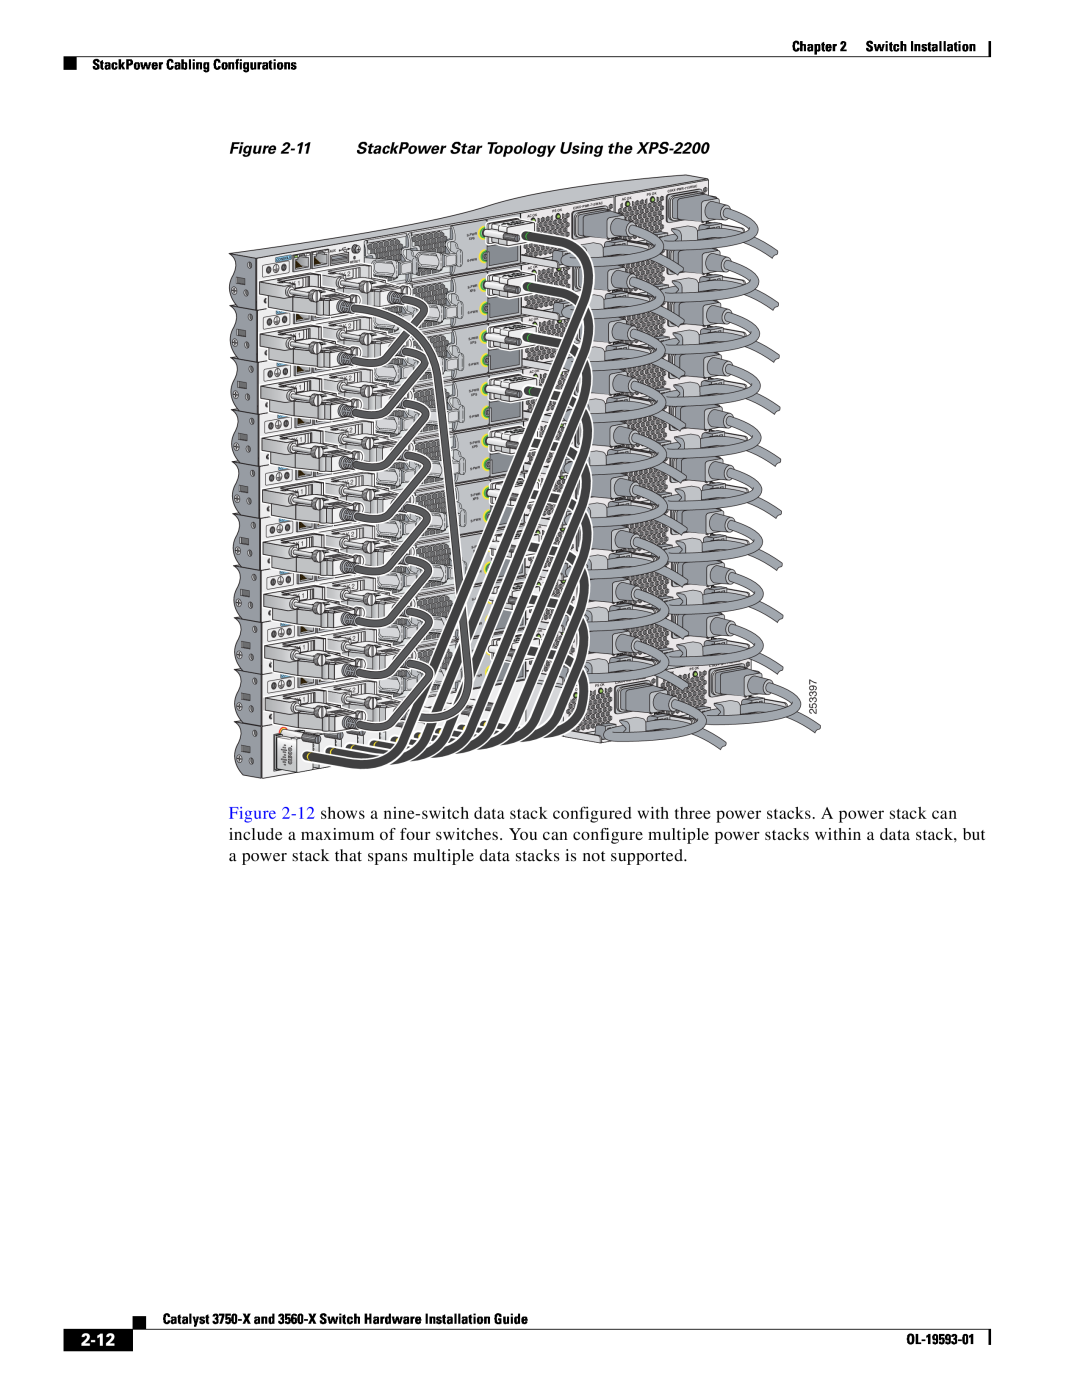 Cisco Systems 3750-X, 3560-X manual 2-12, StackPower Cabling Configurations, 253397, OL-19593-01 